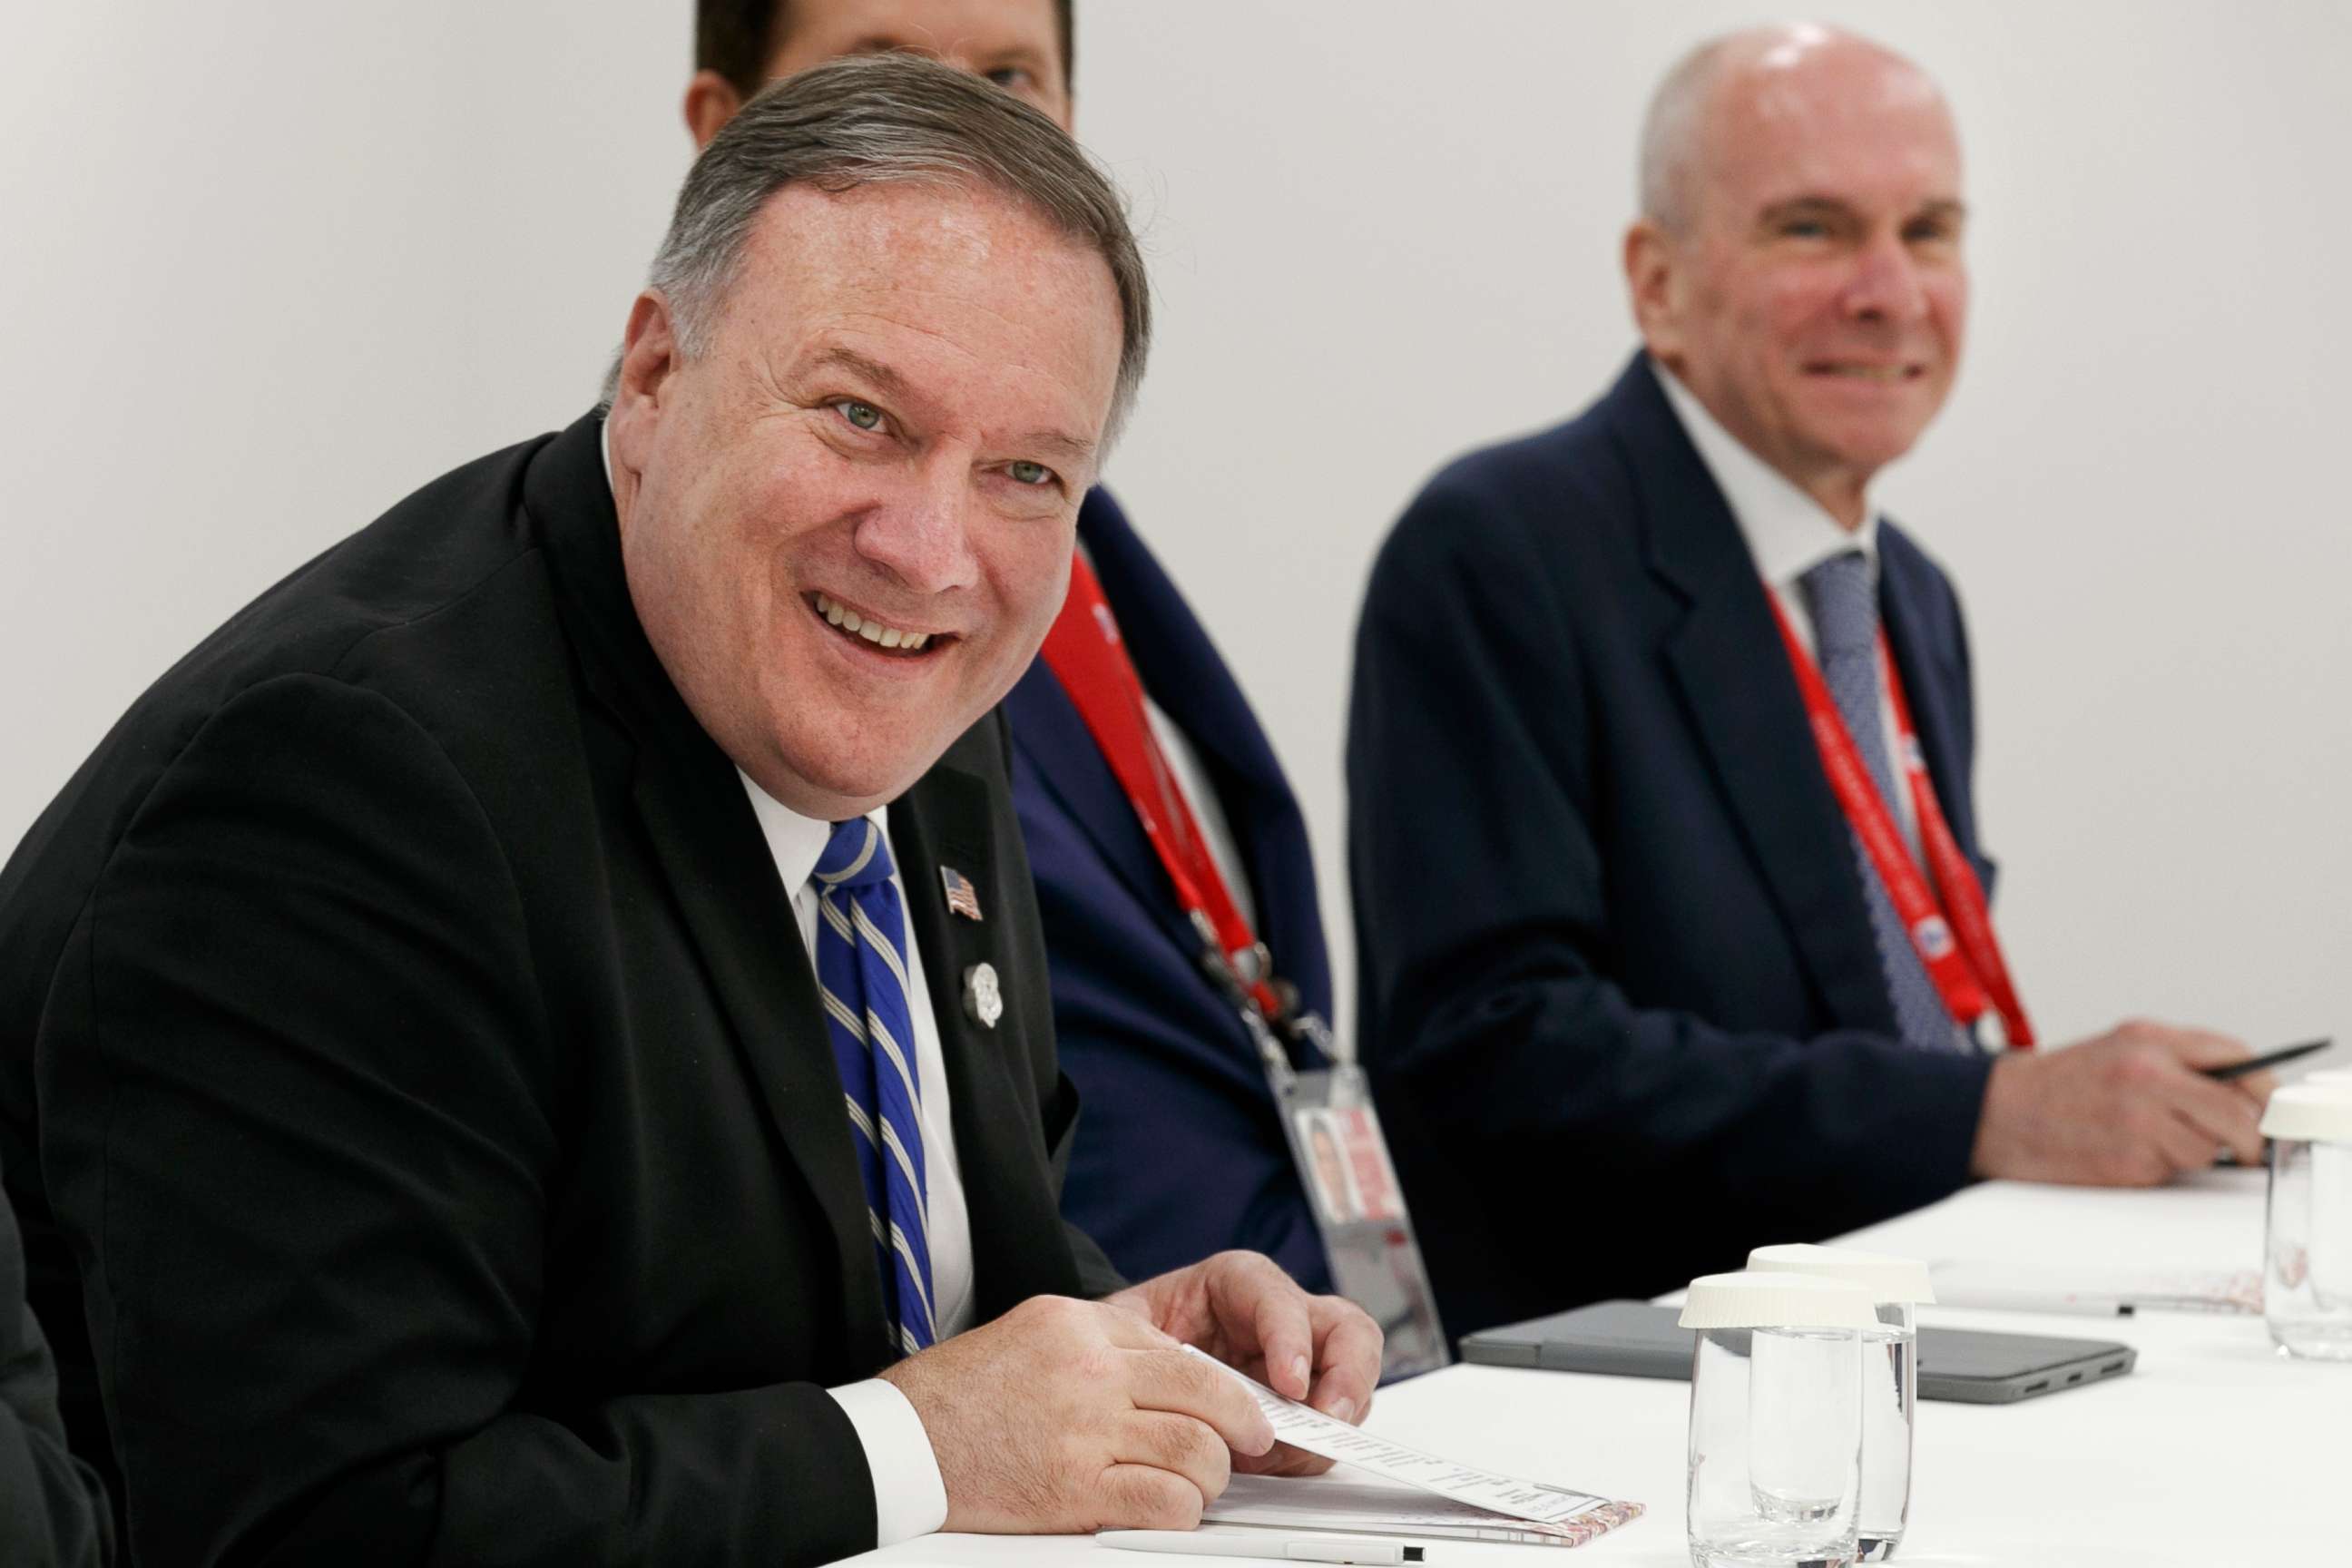 PHOTO: FILE - In this June 28, 2019, file photo, Secretary of State Mike Pompeo, left, sits down for a meeting in Osaka, Japan, during the G-20 summit, with senior adviser Michael McKinley, right.